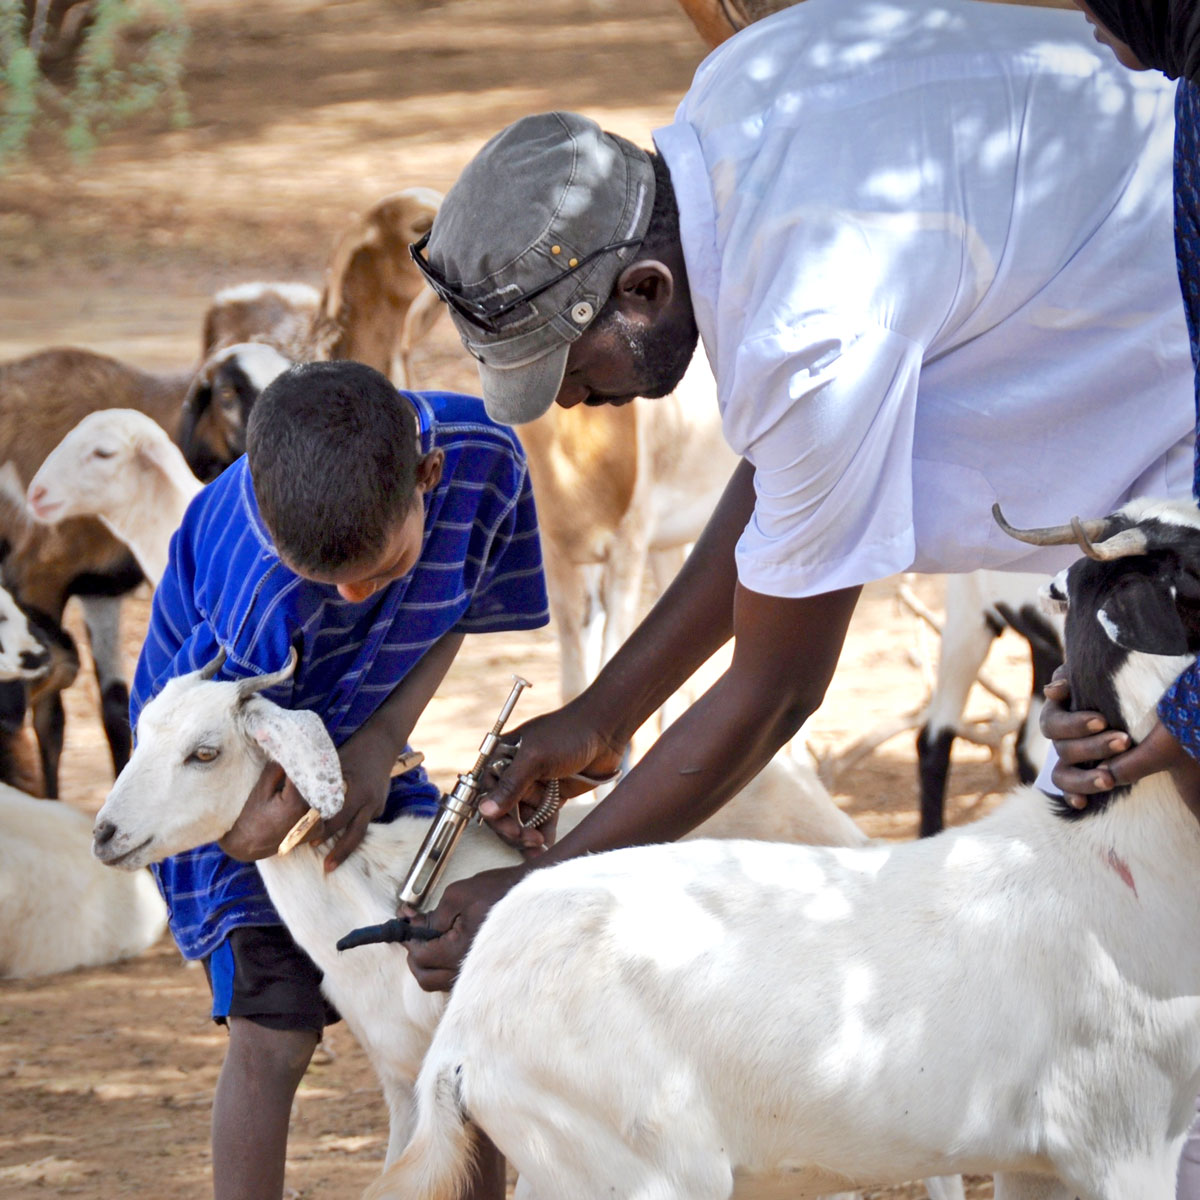 Saidi vaccinates a goat with the help of a local child/herder